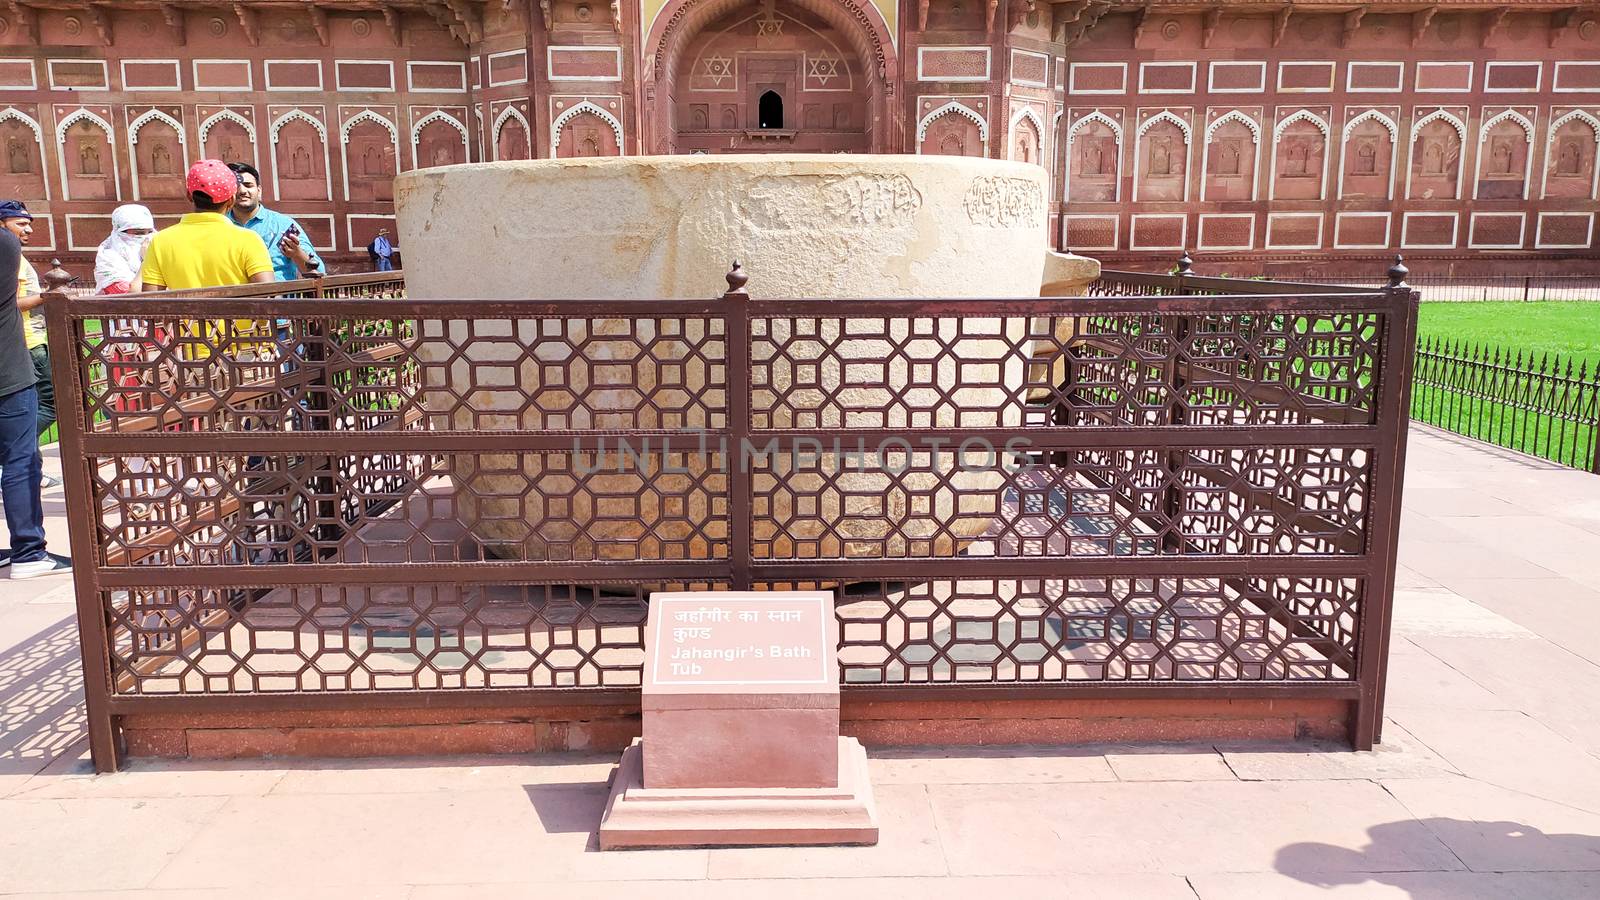 Jahangir bath tab in Orchha agra fort Jahangir Mahal a pink sandstone fortification Palace of moghuls emperor Mahal-e-Jahangir a citadel and garrison n unesco ancient heritage site Agra India May 2019